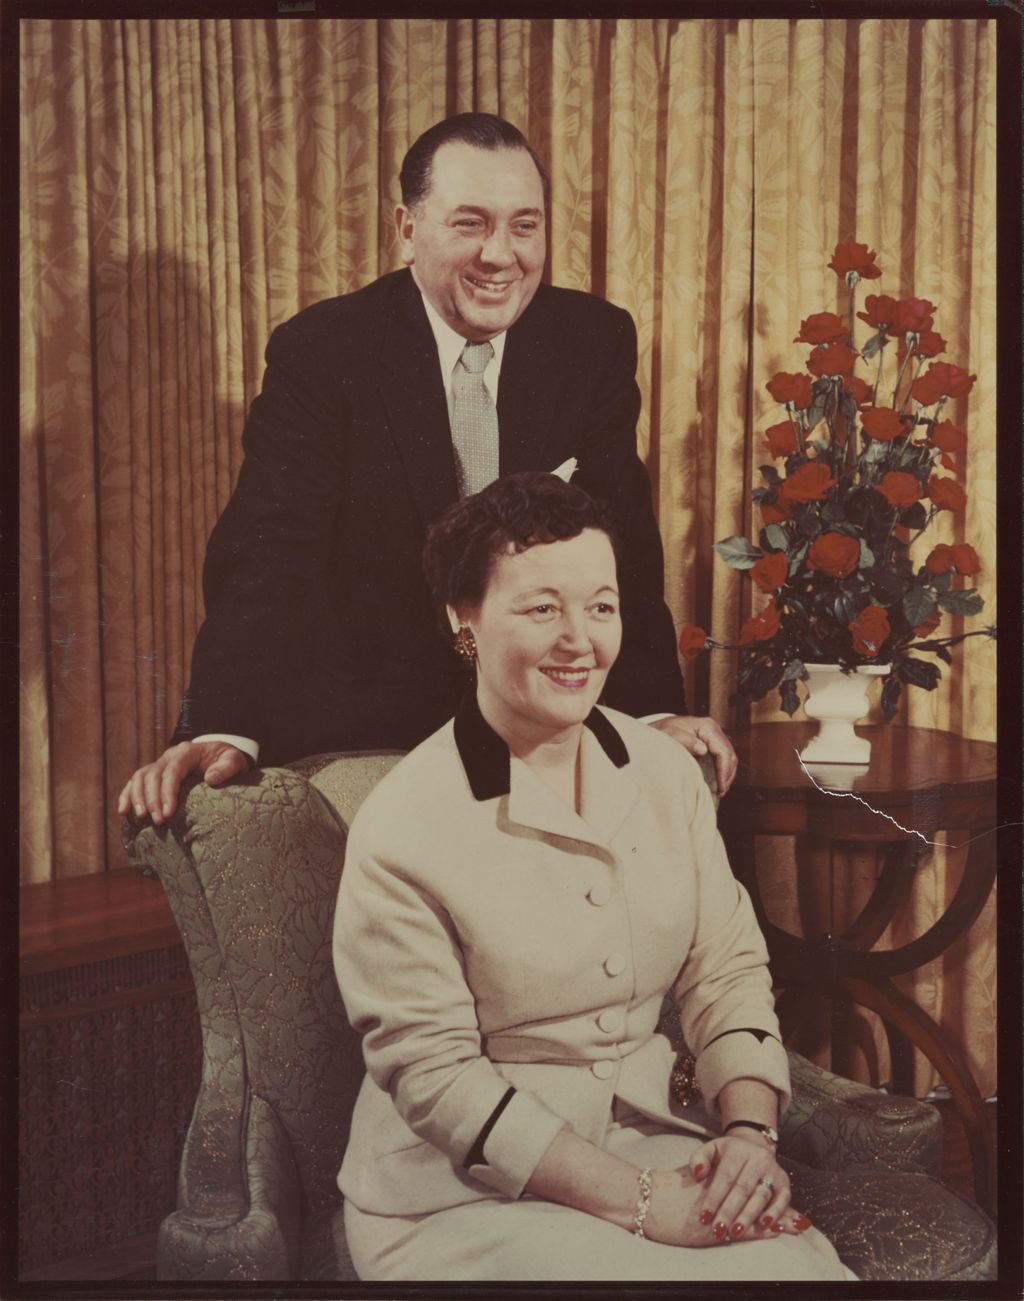 Portrait of Eleanor "Sis" Daley and Richard J. Daley